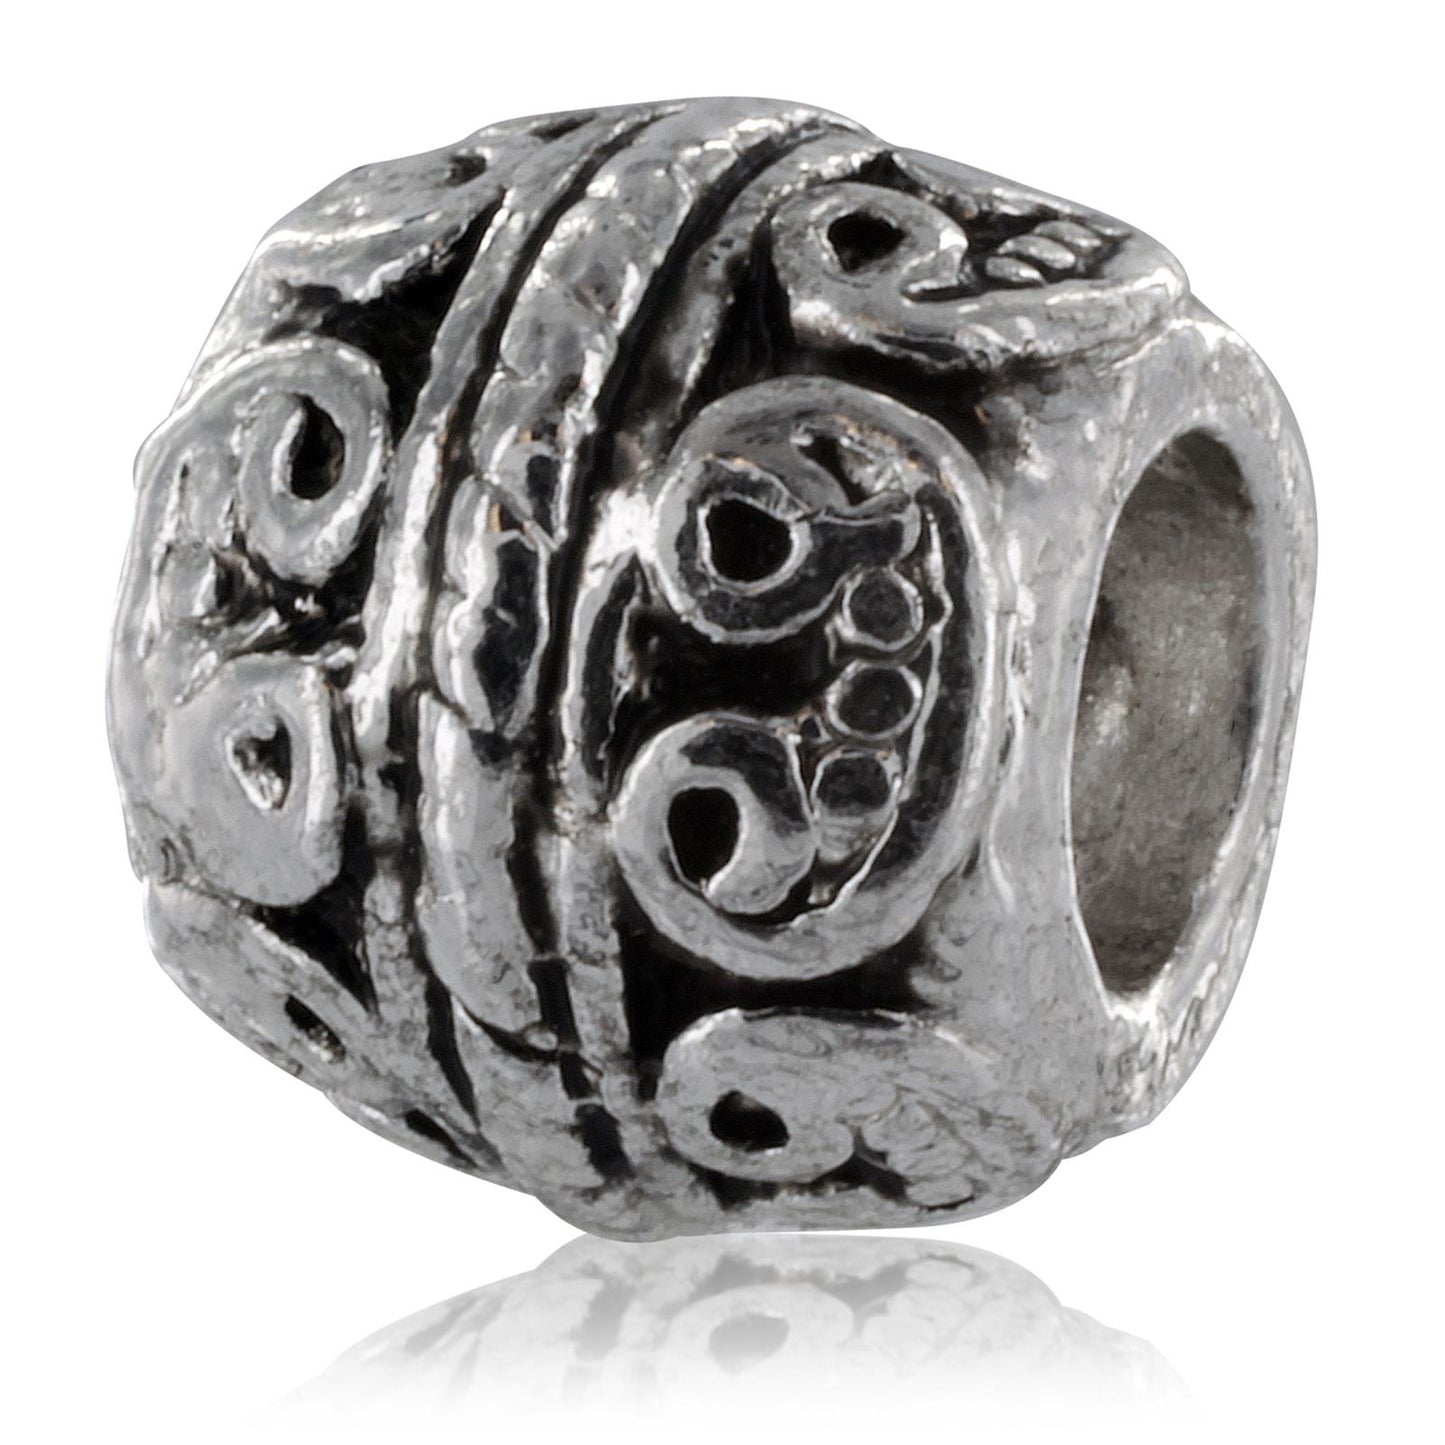 Silver Plated Whimsical Swirl Design Bead